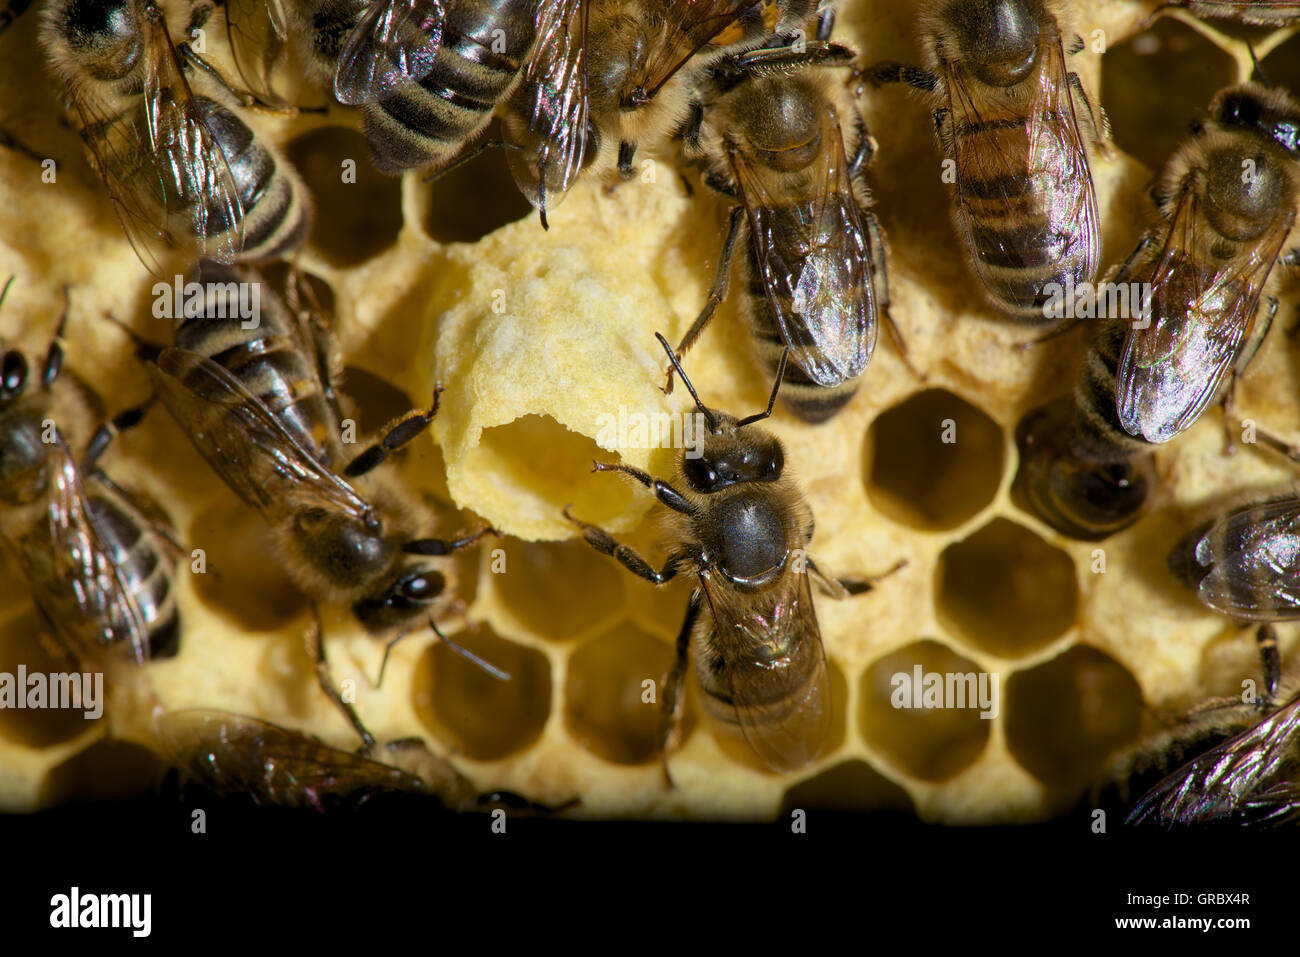 Broodcomb With Queen Cells And Workers Stock Photo